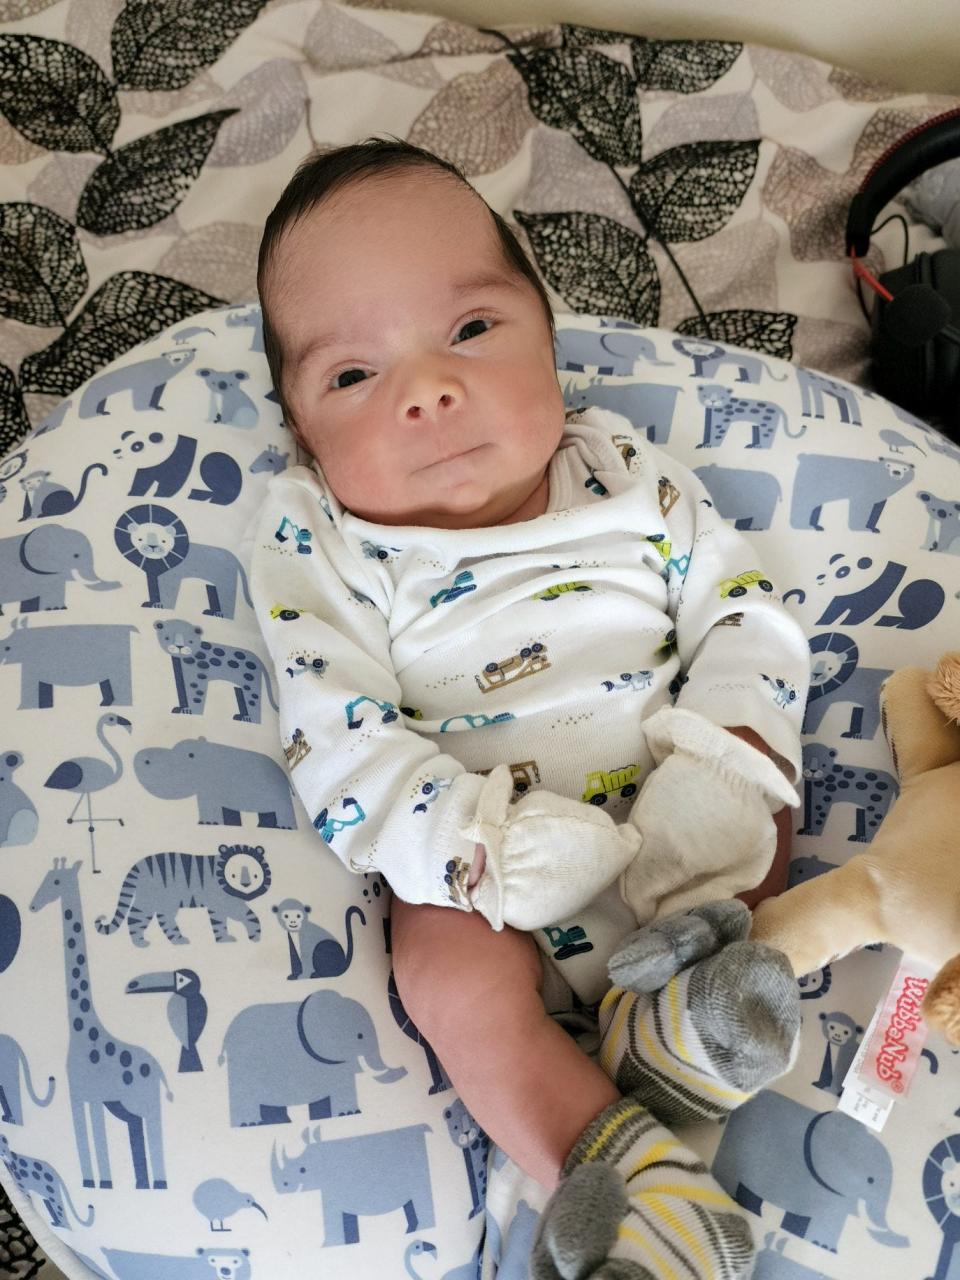 Ares Sanchez is celebrating his first Mother's Day with his mother, Edith Sanchez, after his birth and a fetoscopic procedure to repair his spina bifida in utero.